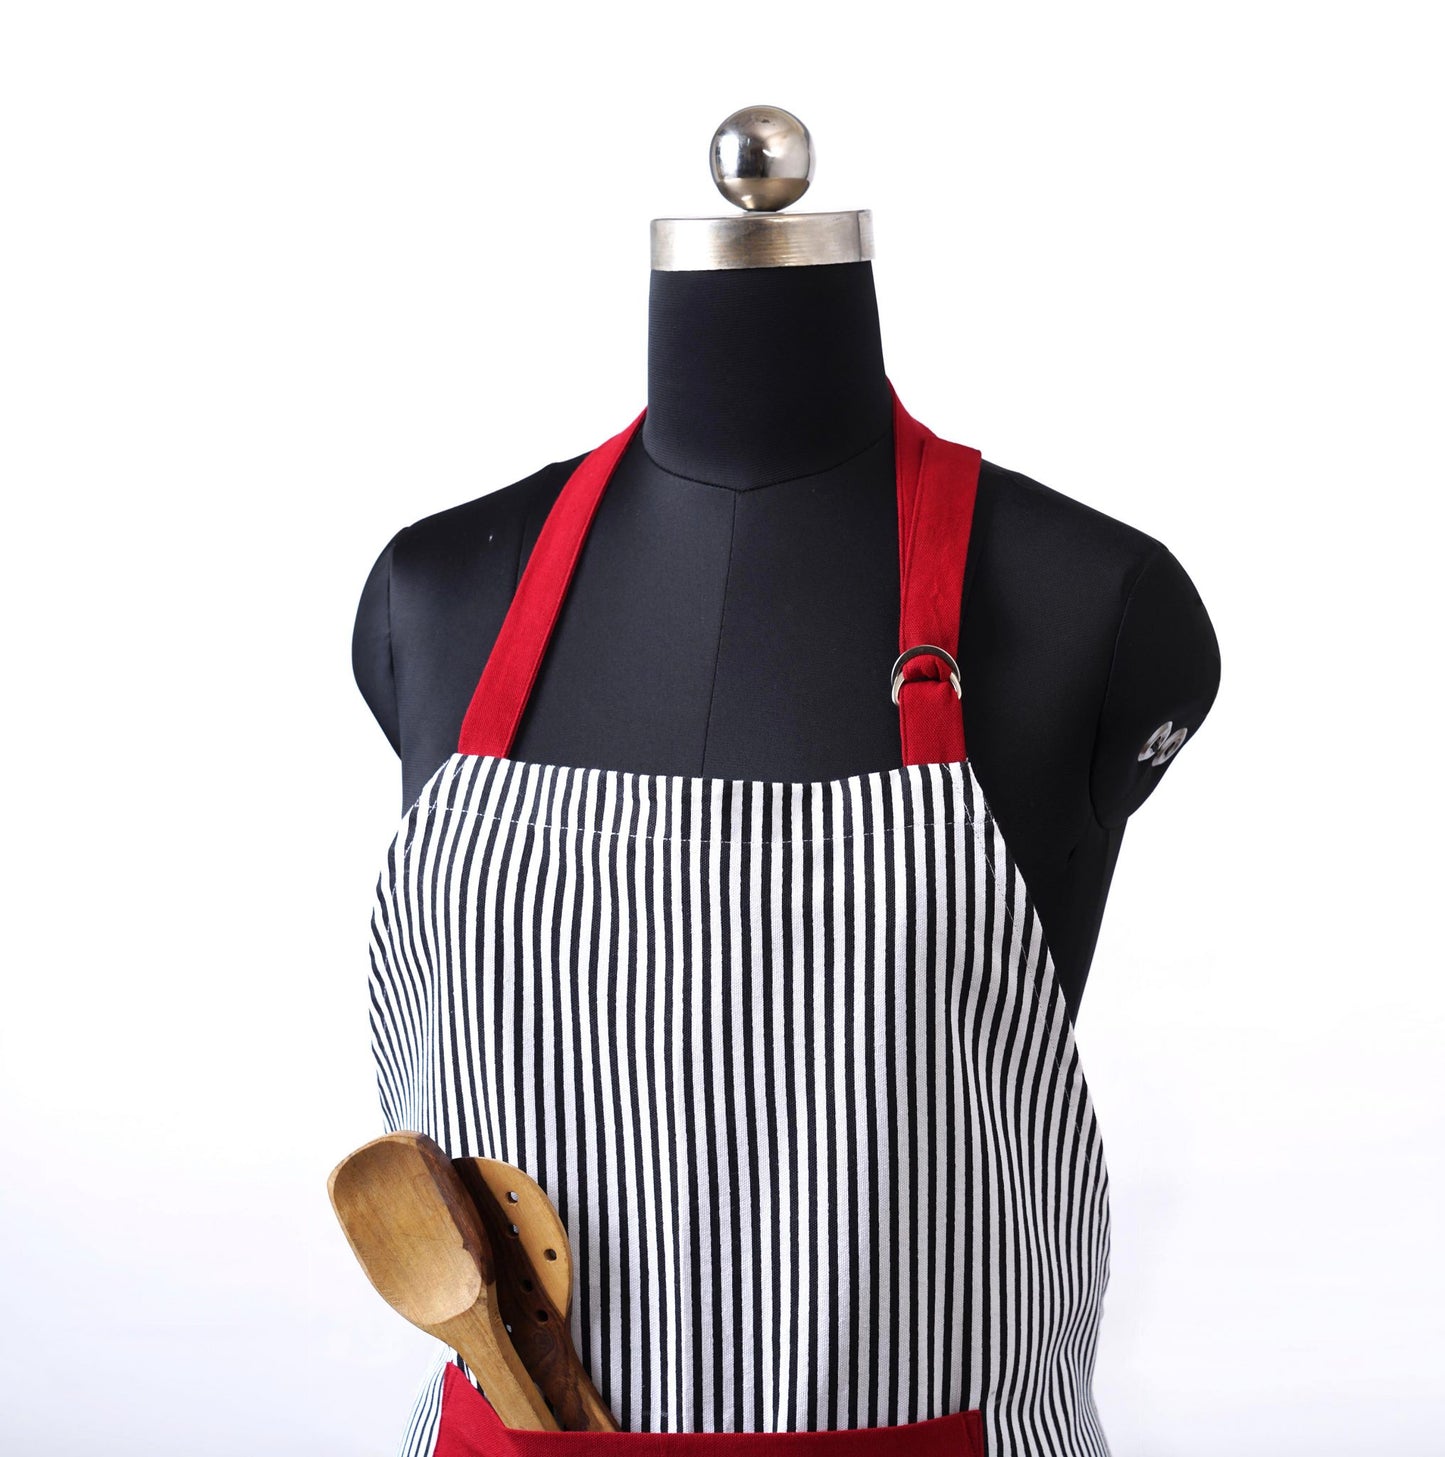 Christmas apron, Black and white stripe with embroidery, kitchen accessory, size 27"X 35"